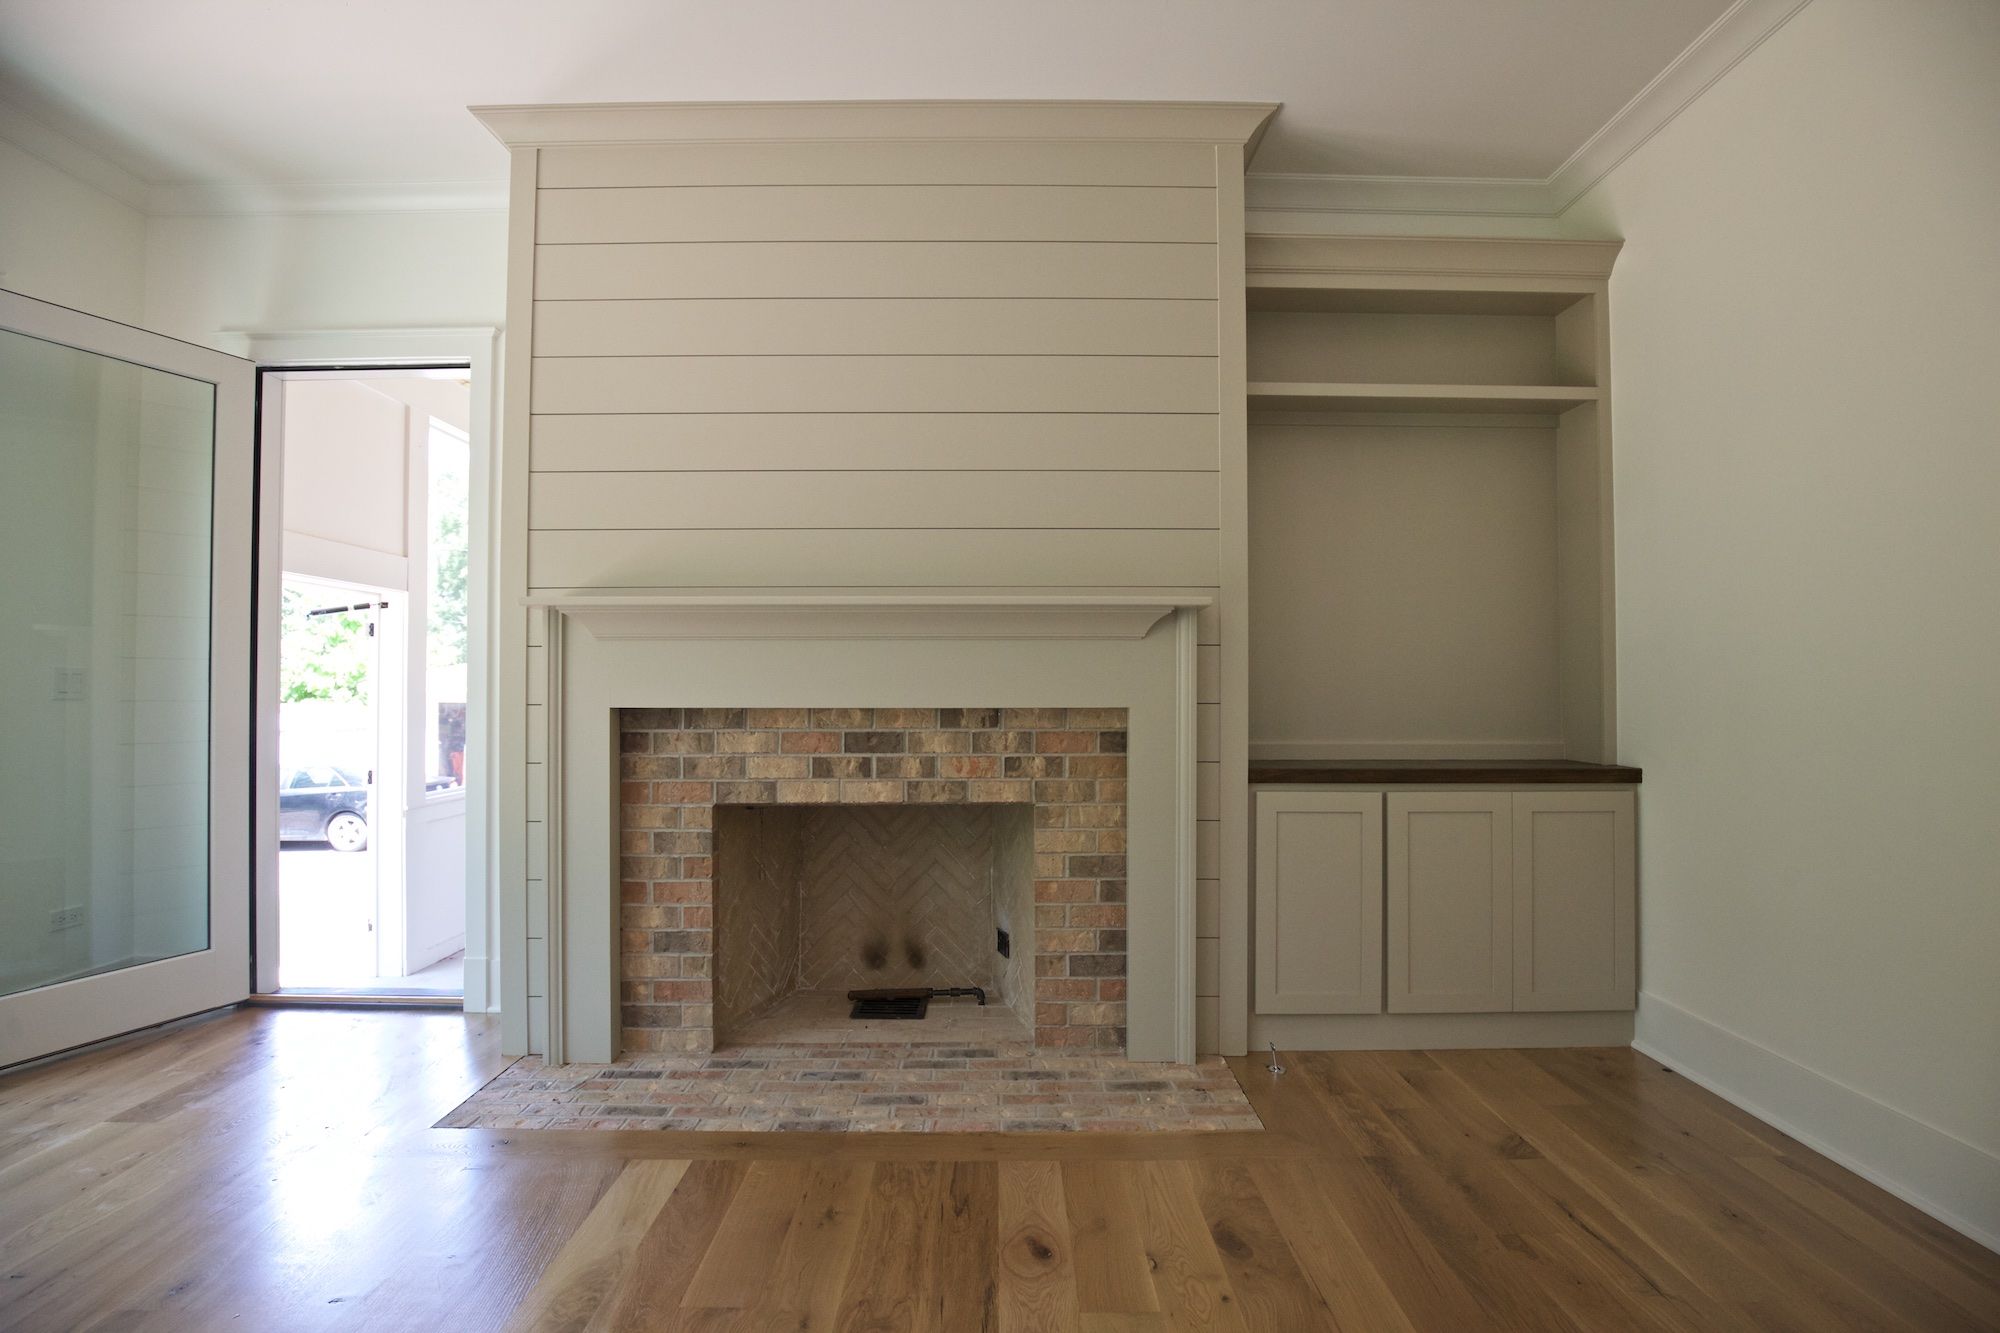 Cottage Fireplace Elegant Shiplap Fireplace Surround In Family Room